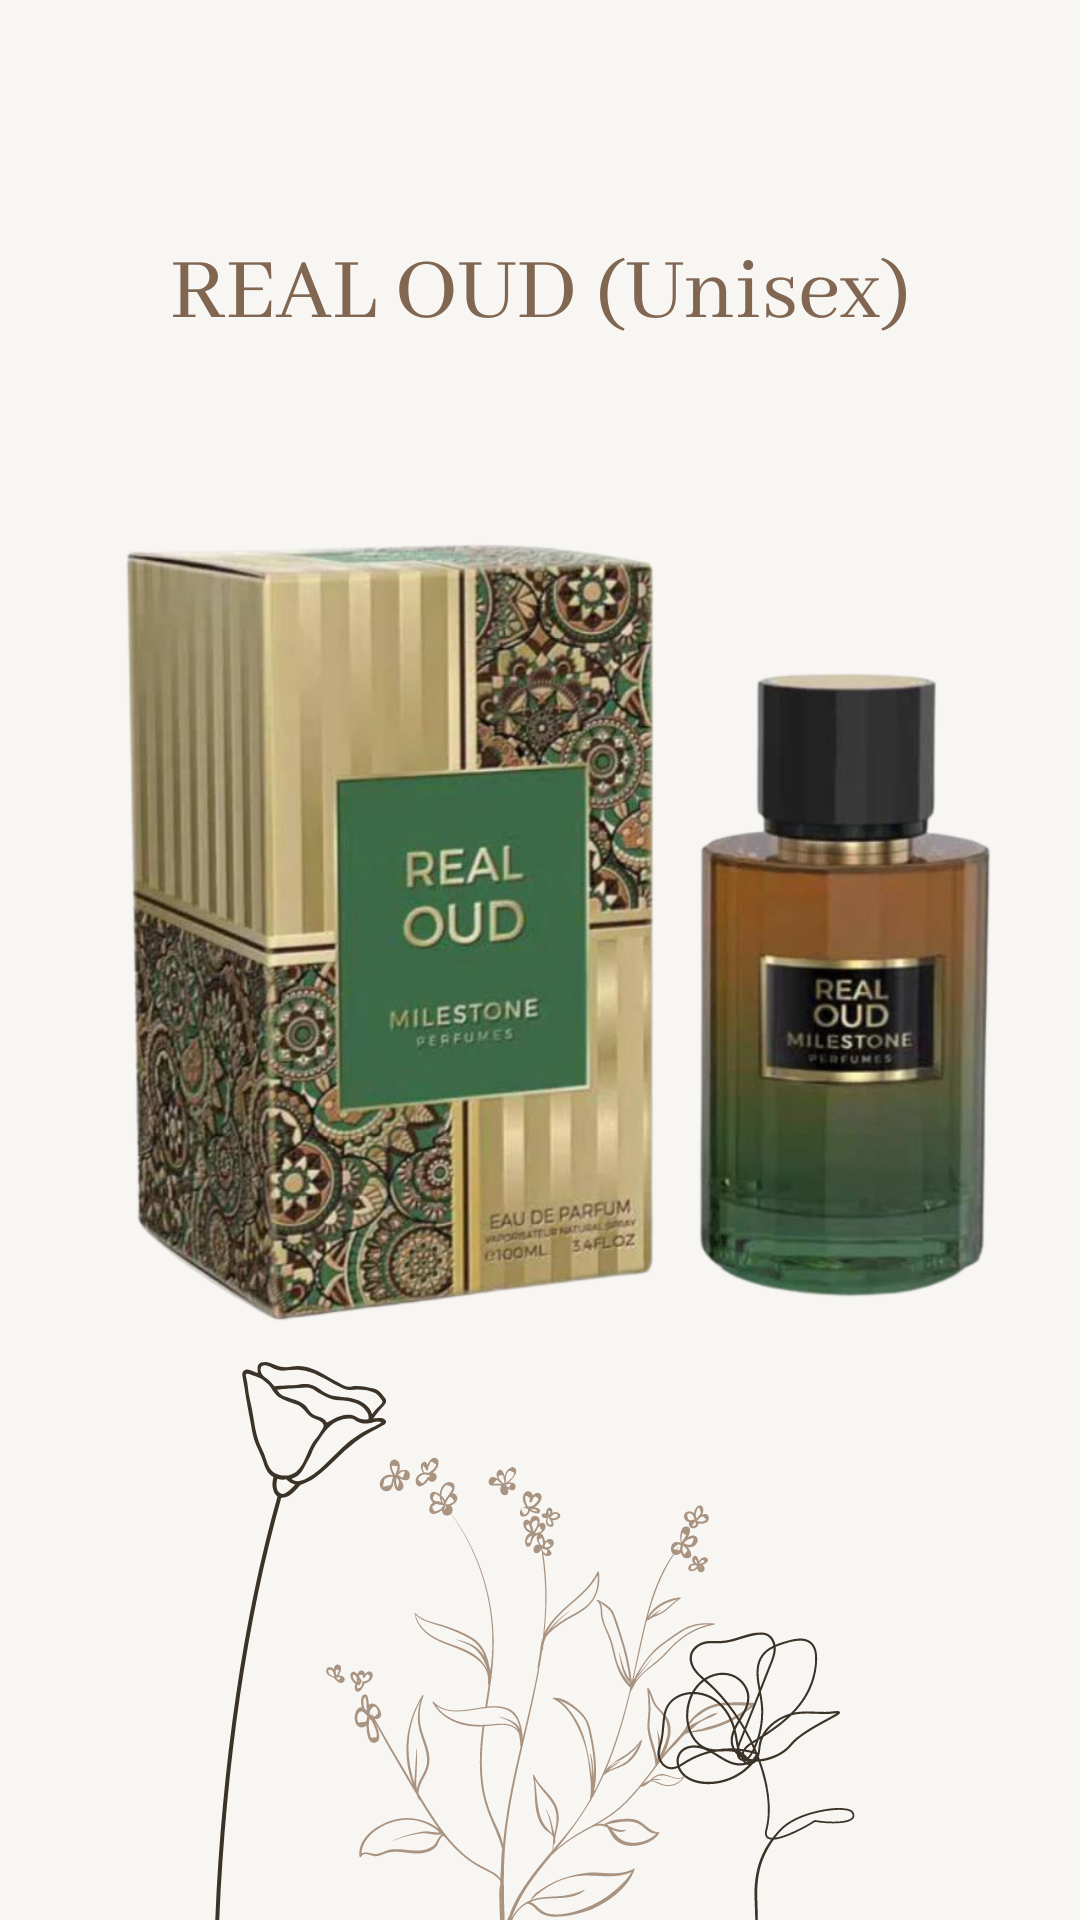 REAL OUD (Unisex)